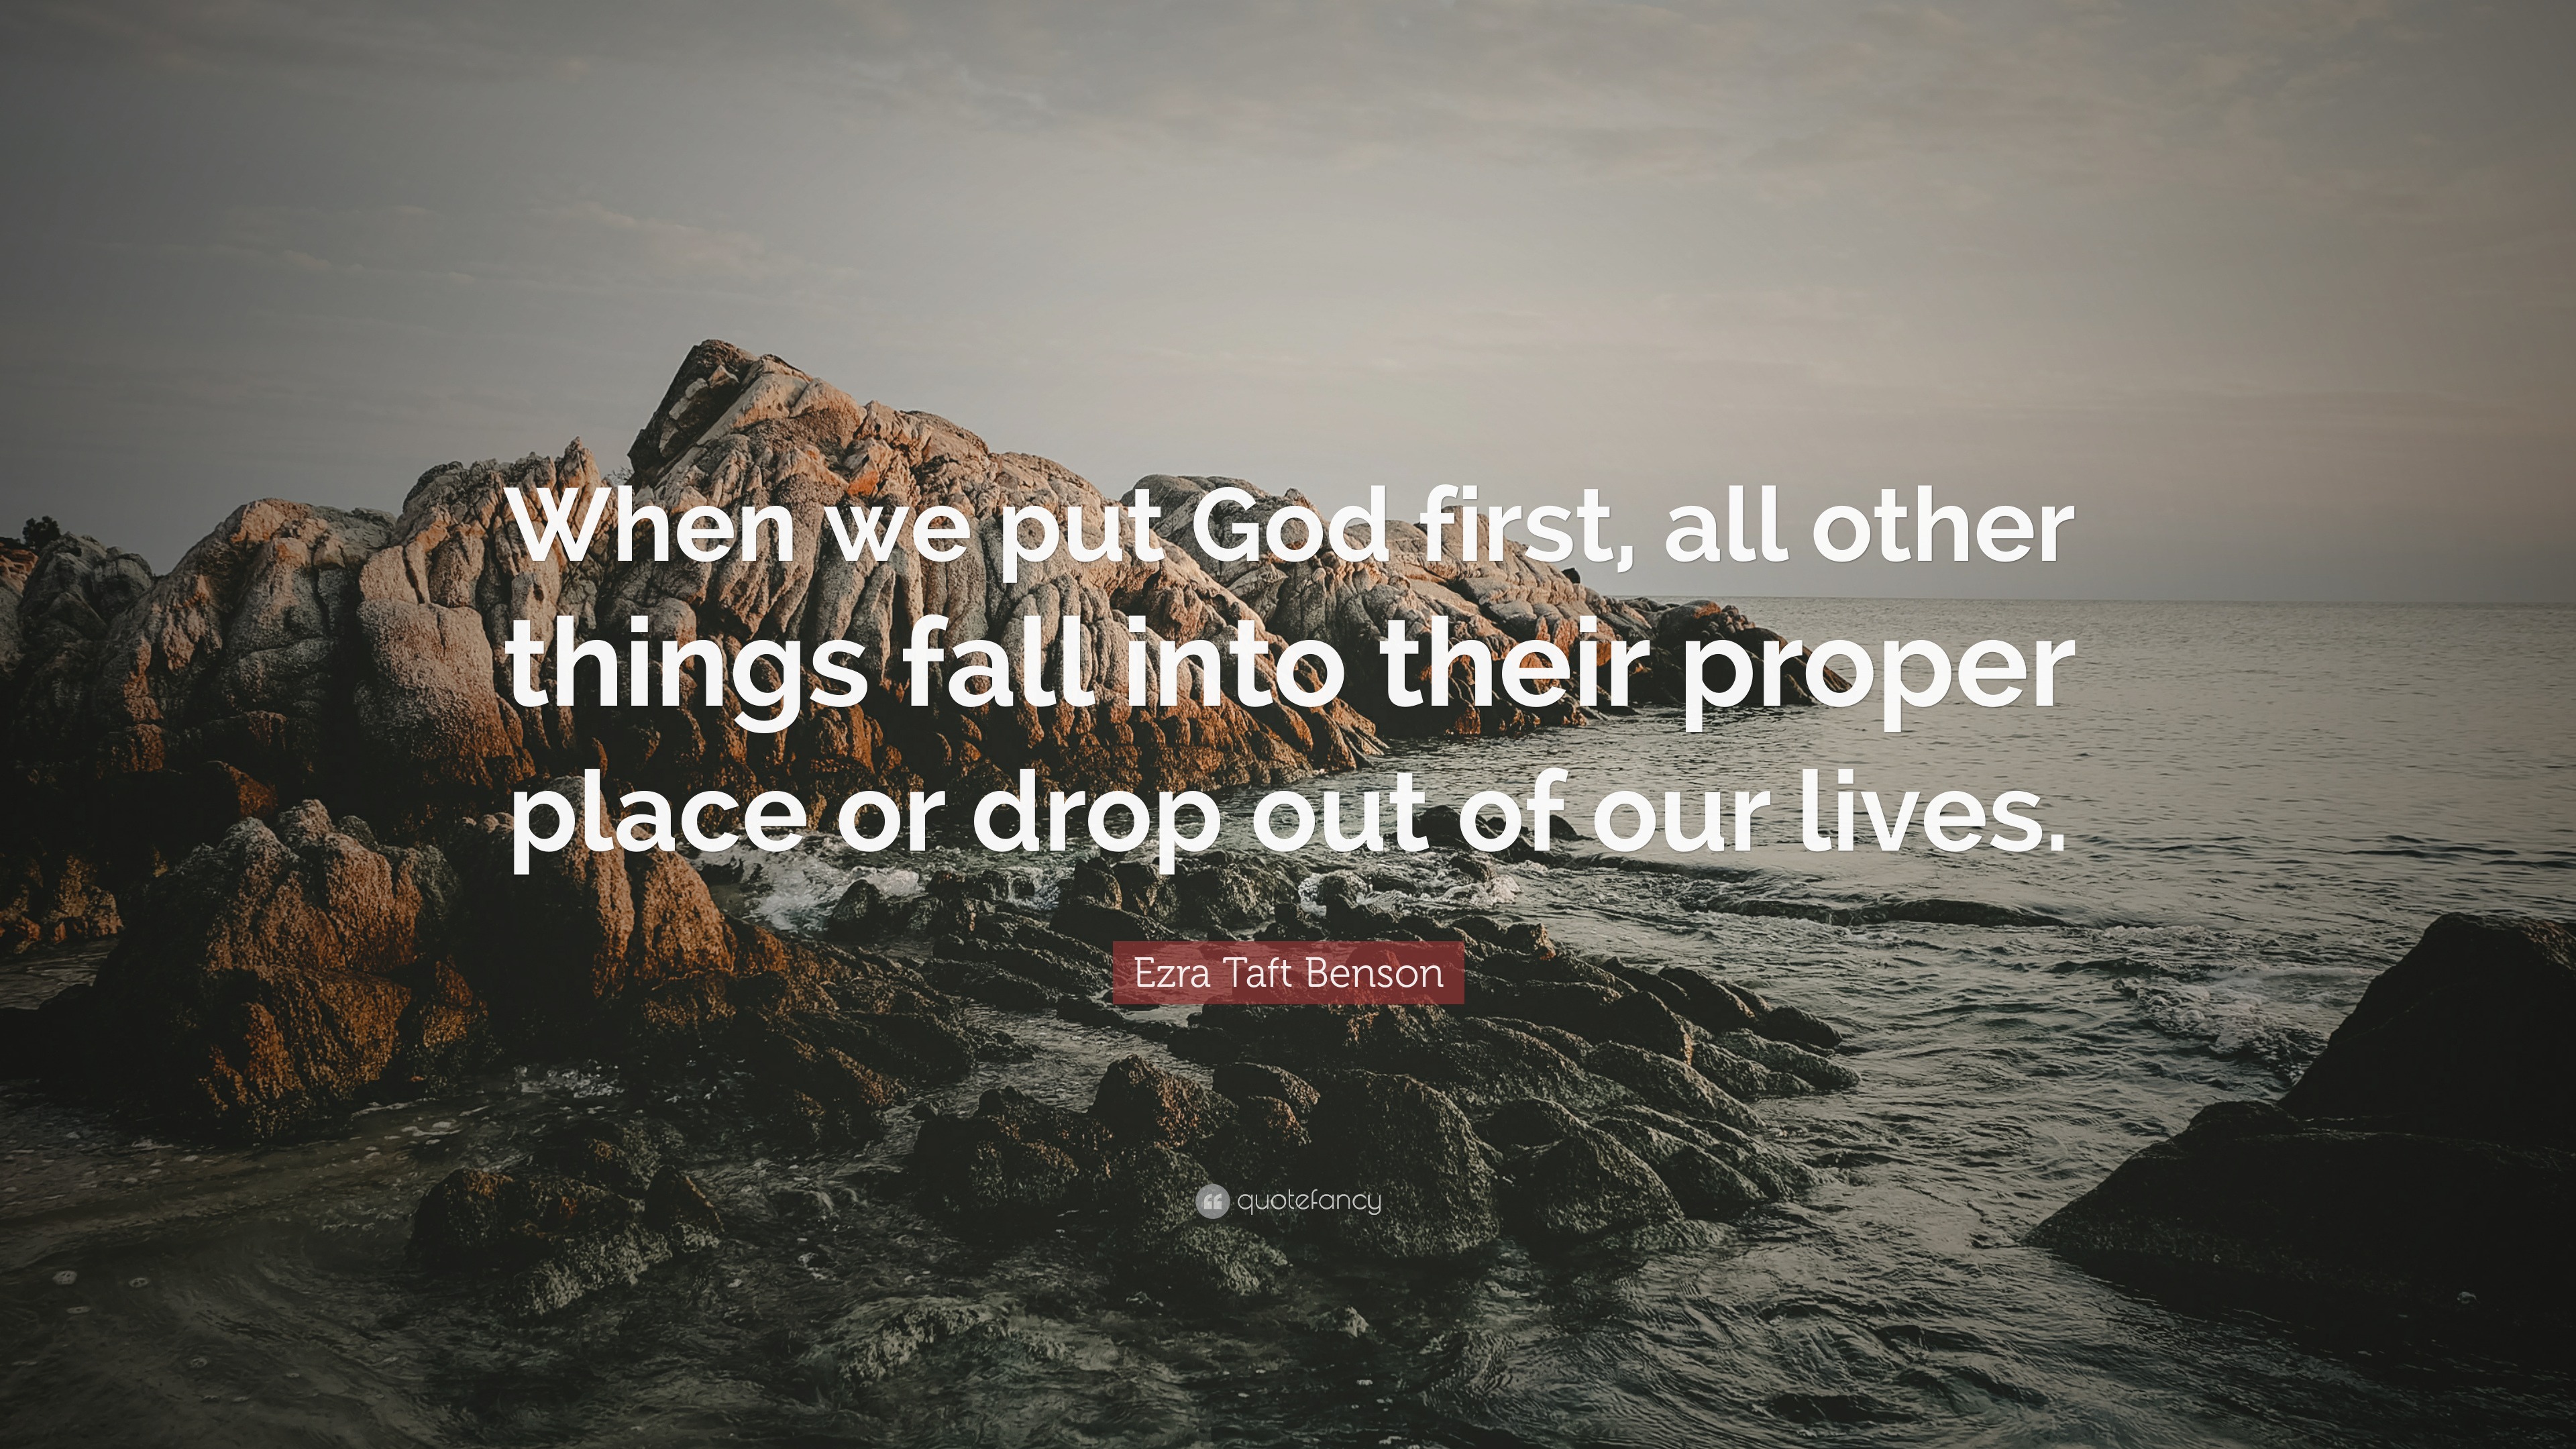 Ezra Taft Benson Quote “when We Put God First All Other Things Fall